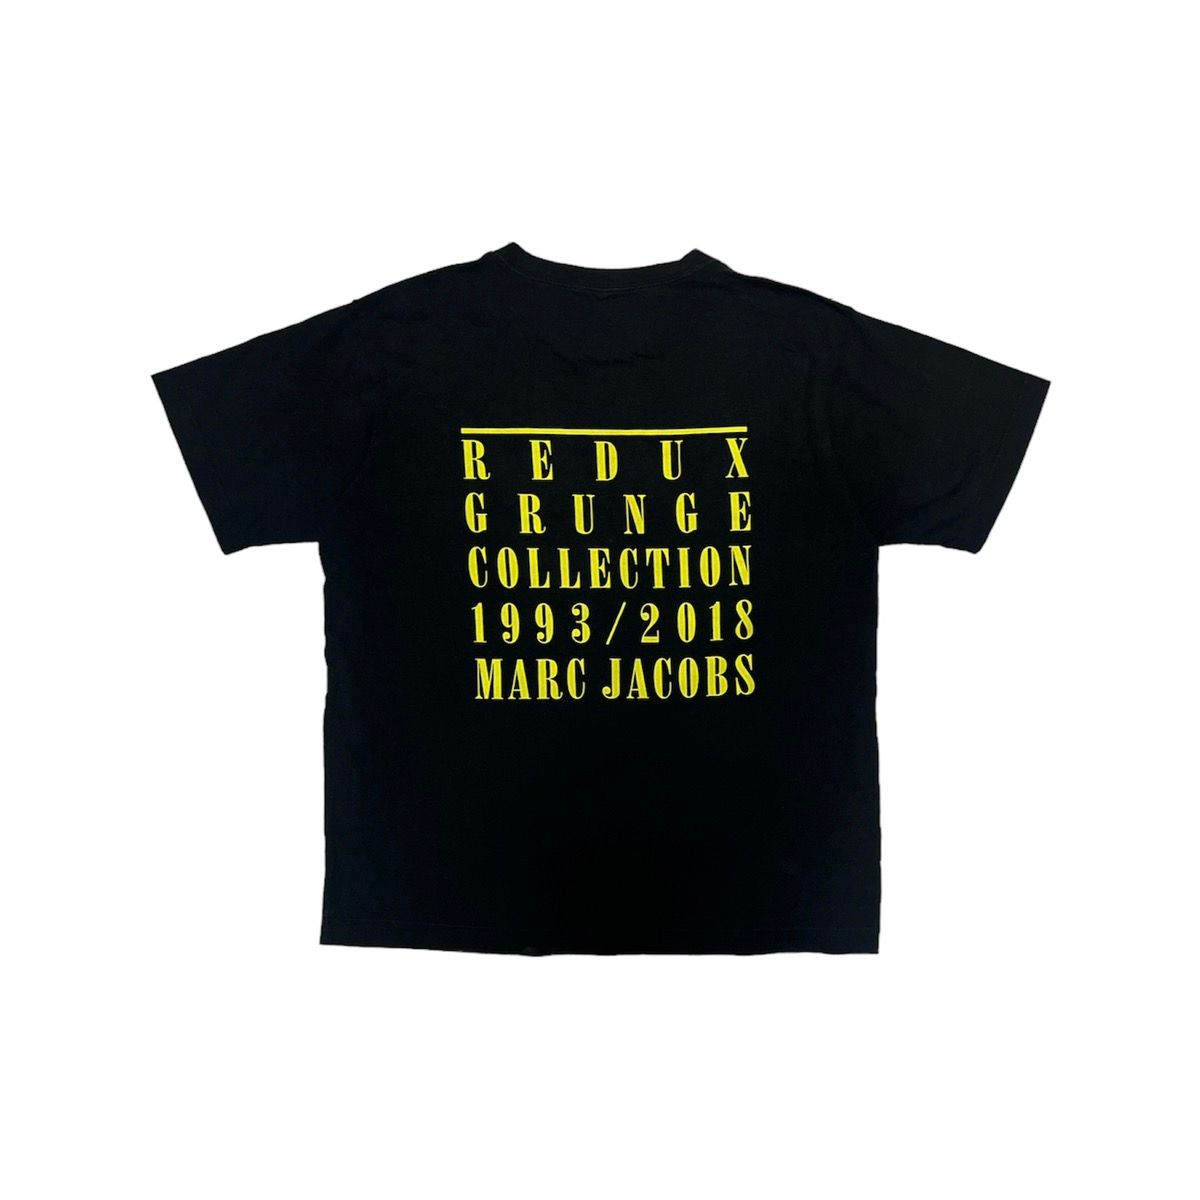 Marc Jacobs Nirvana Redux Grunge Collection 2018 T shirt - 6